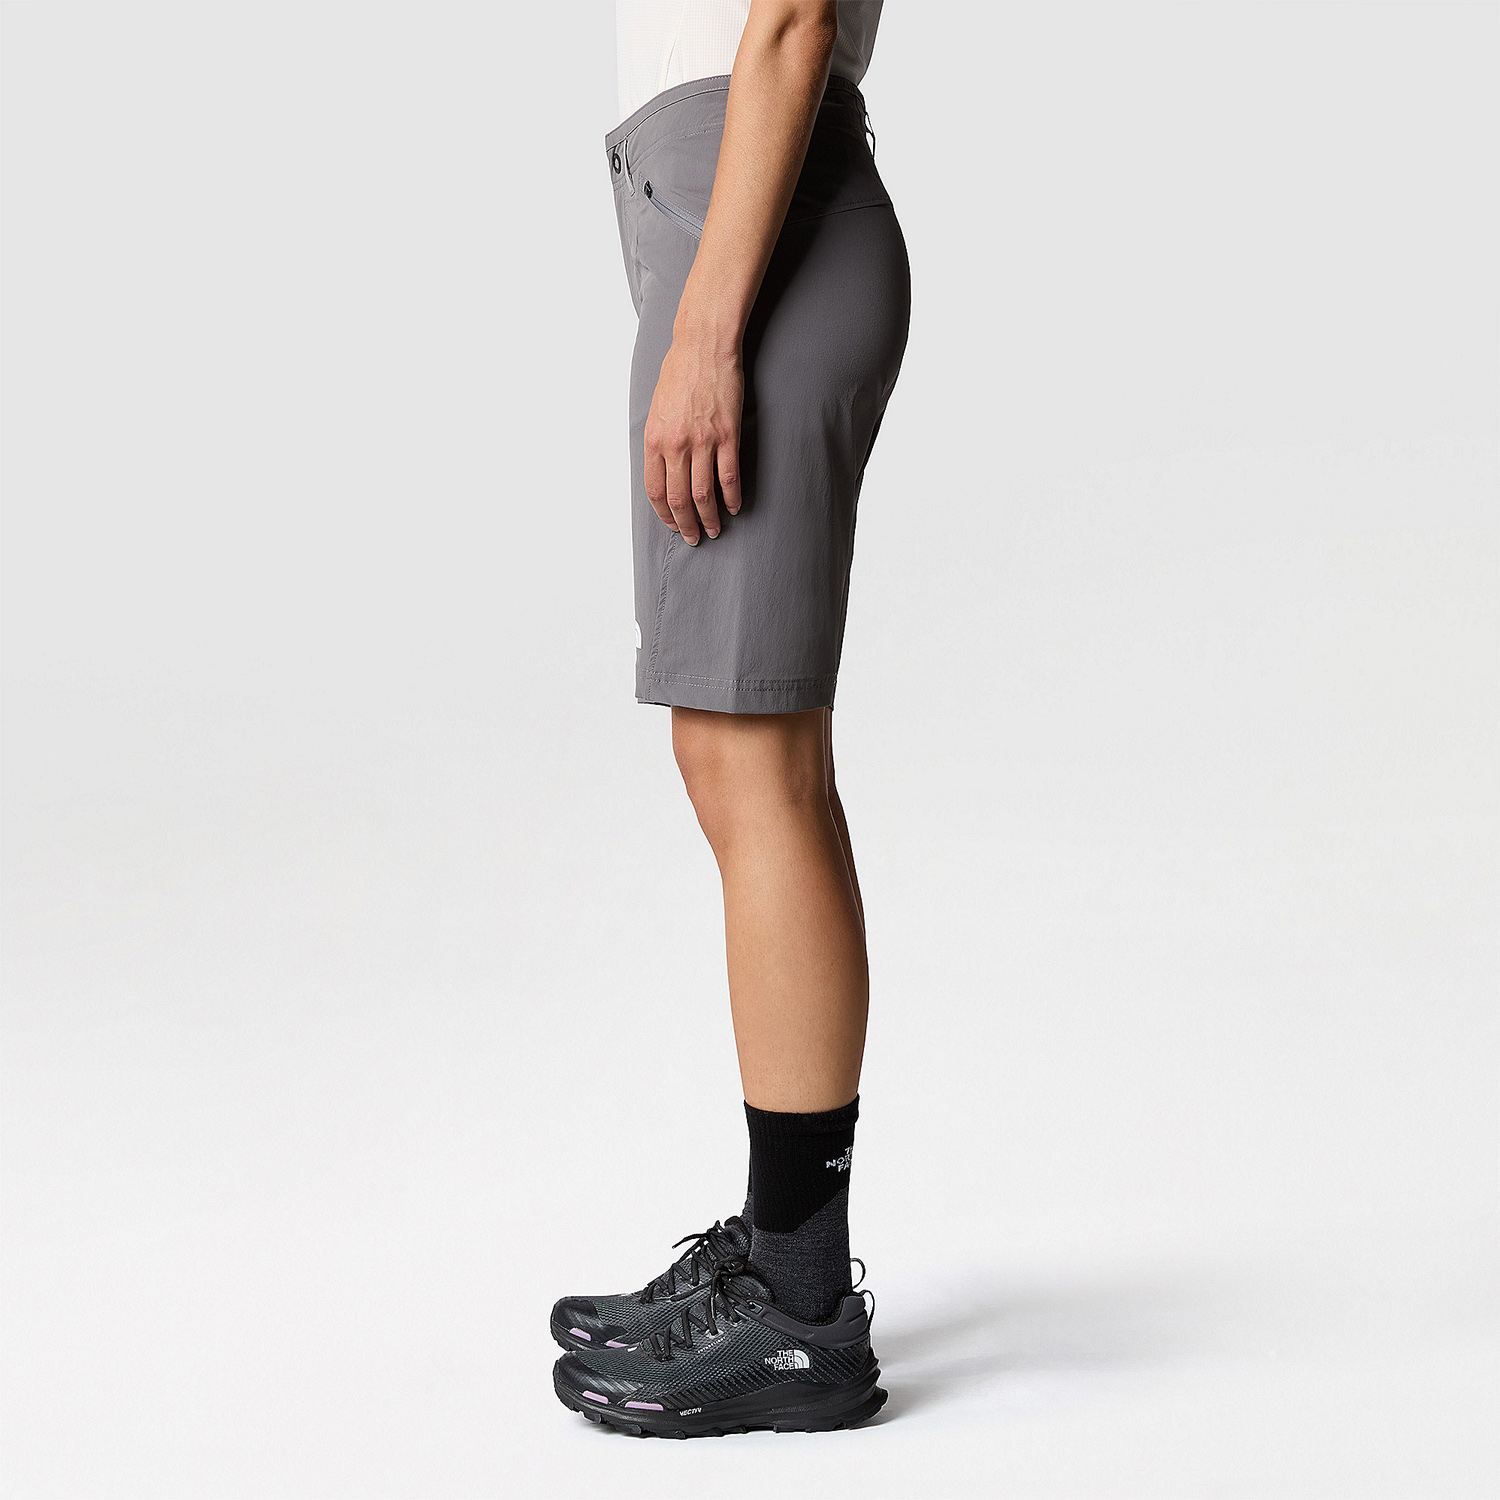 The North Face Speedlight 10in Shorts - Smoked Pearl